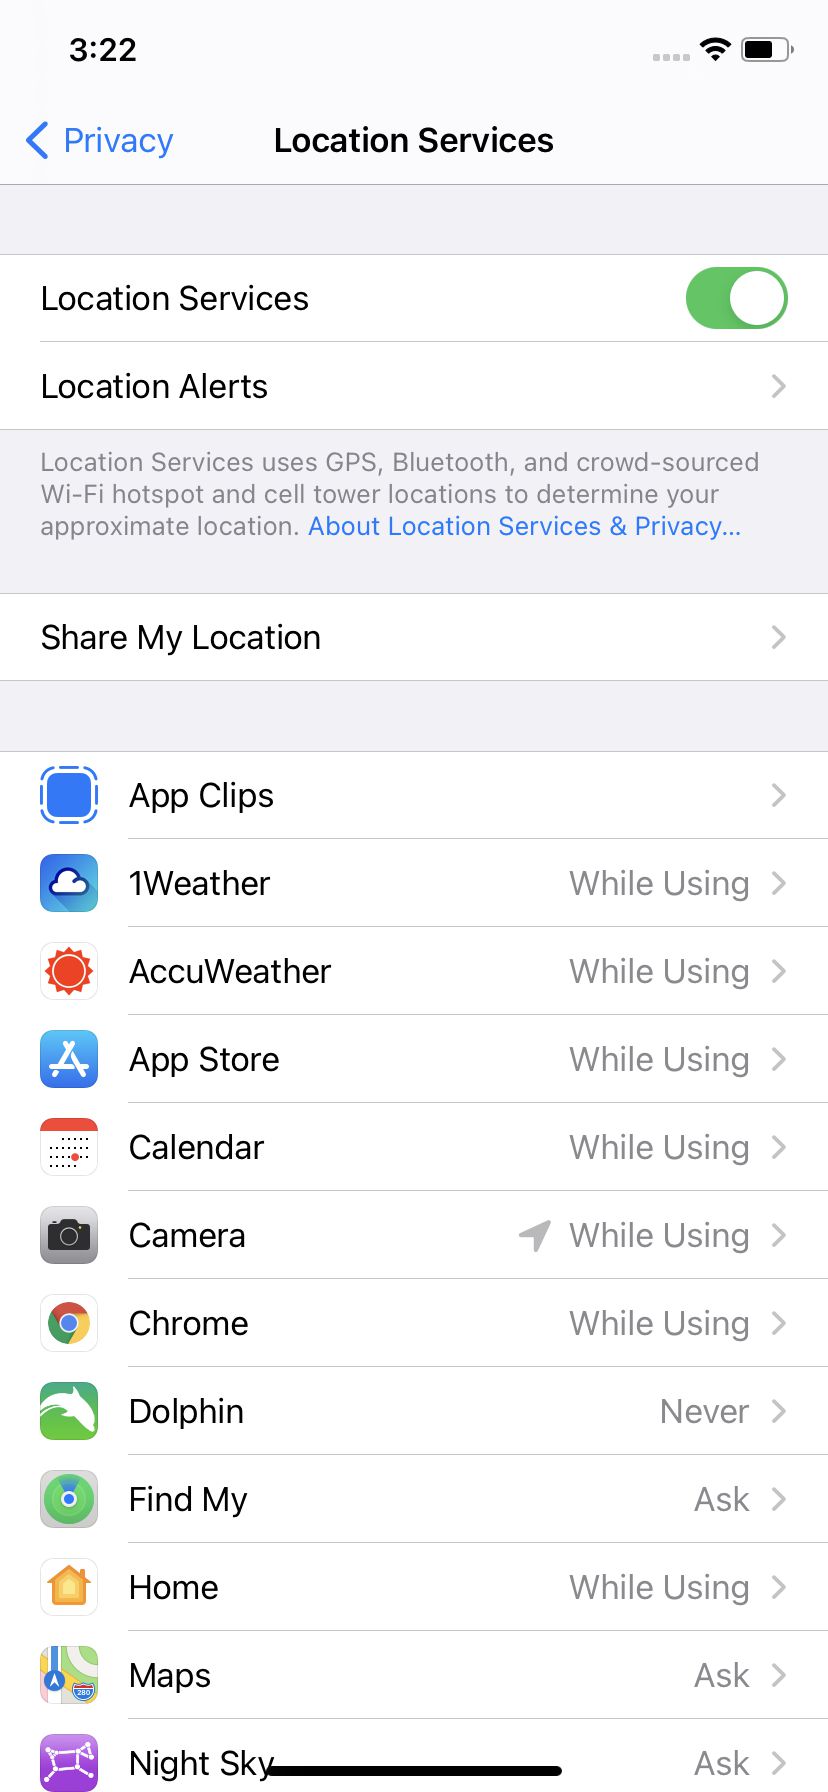 You can also toggle off Location Services